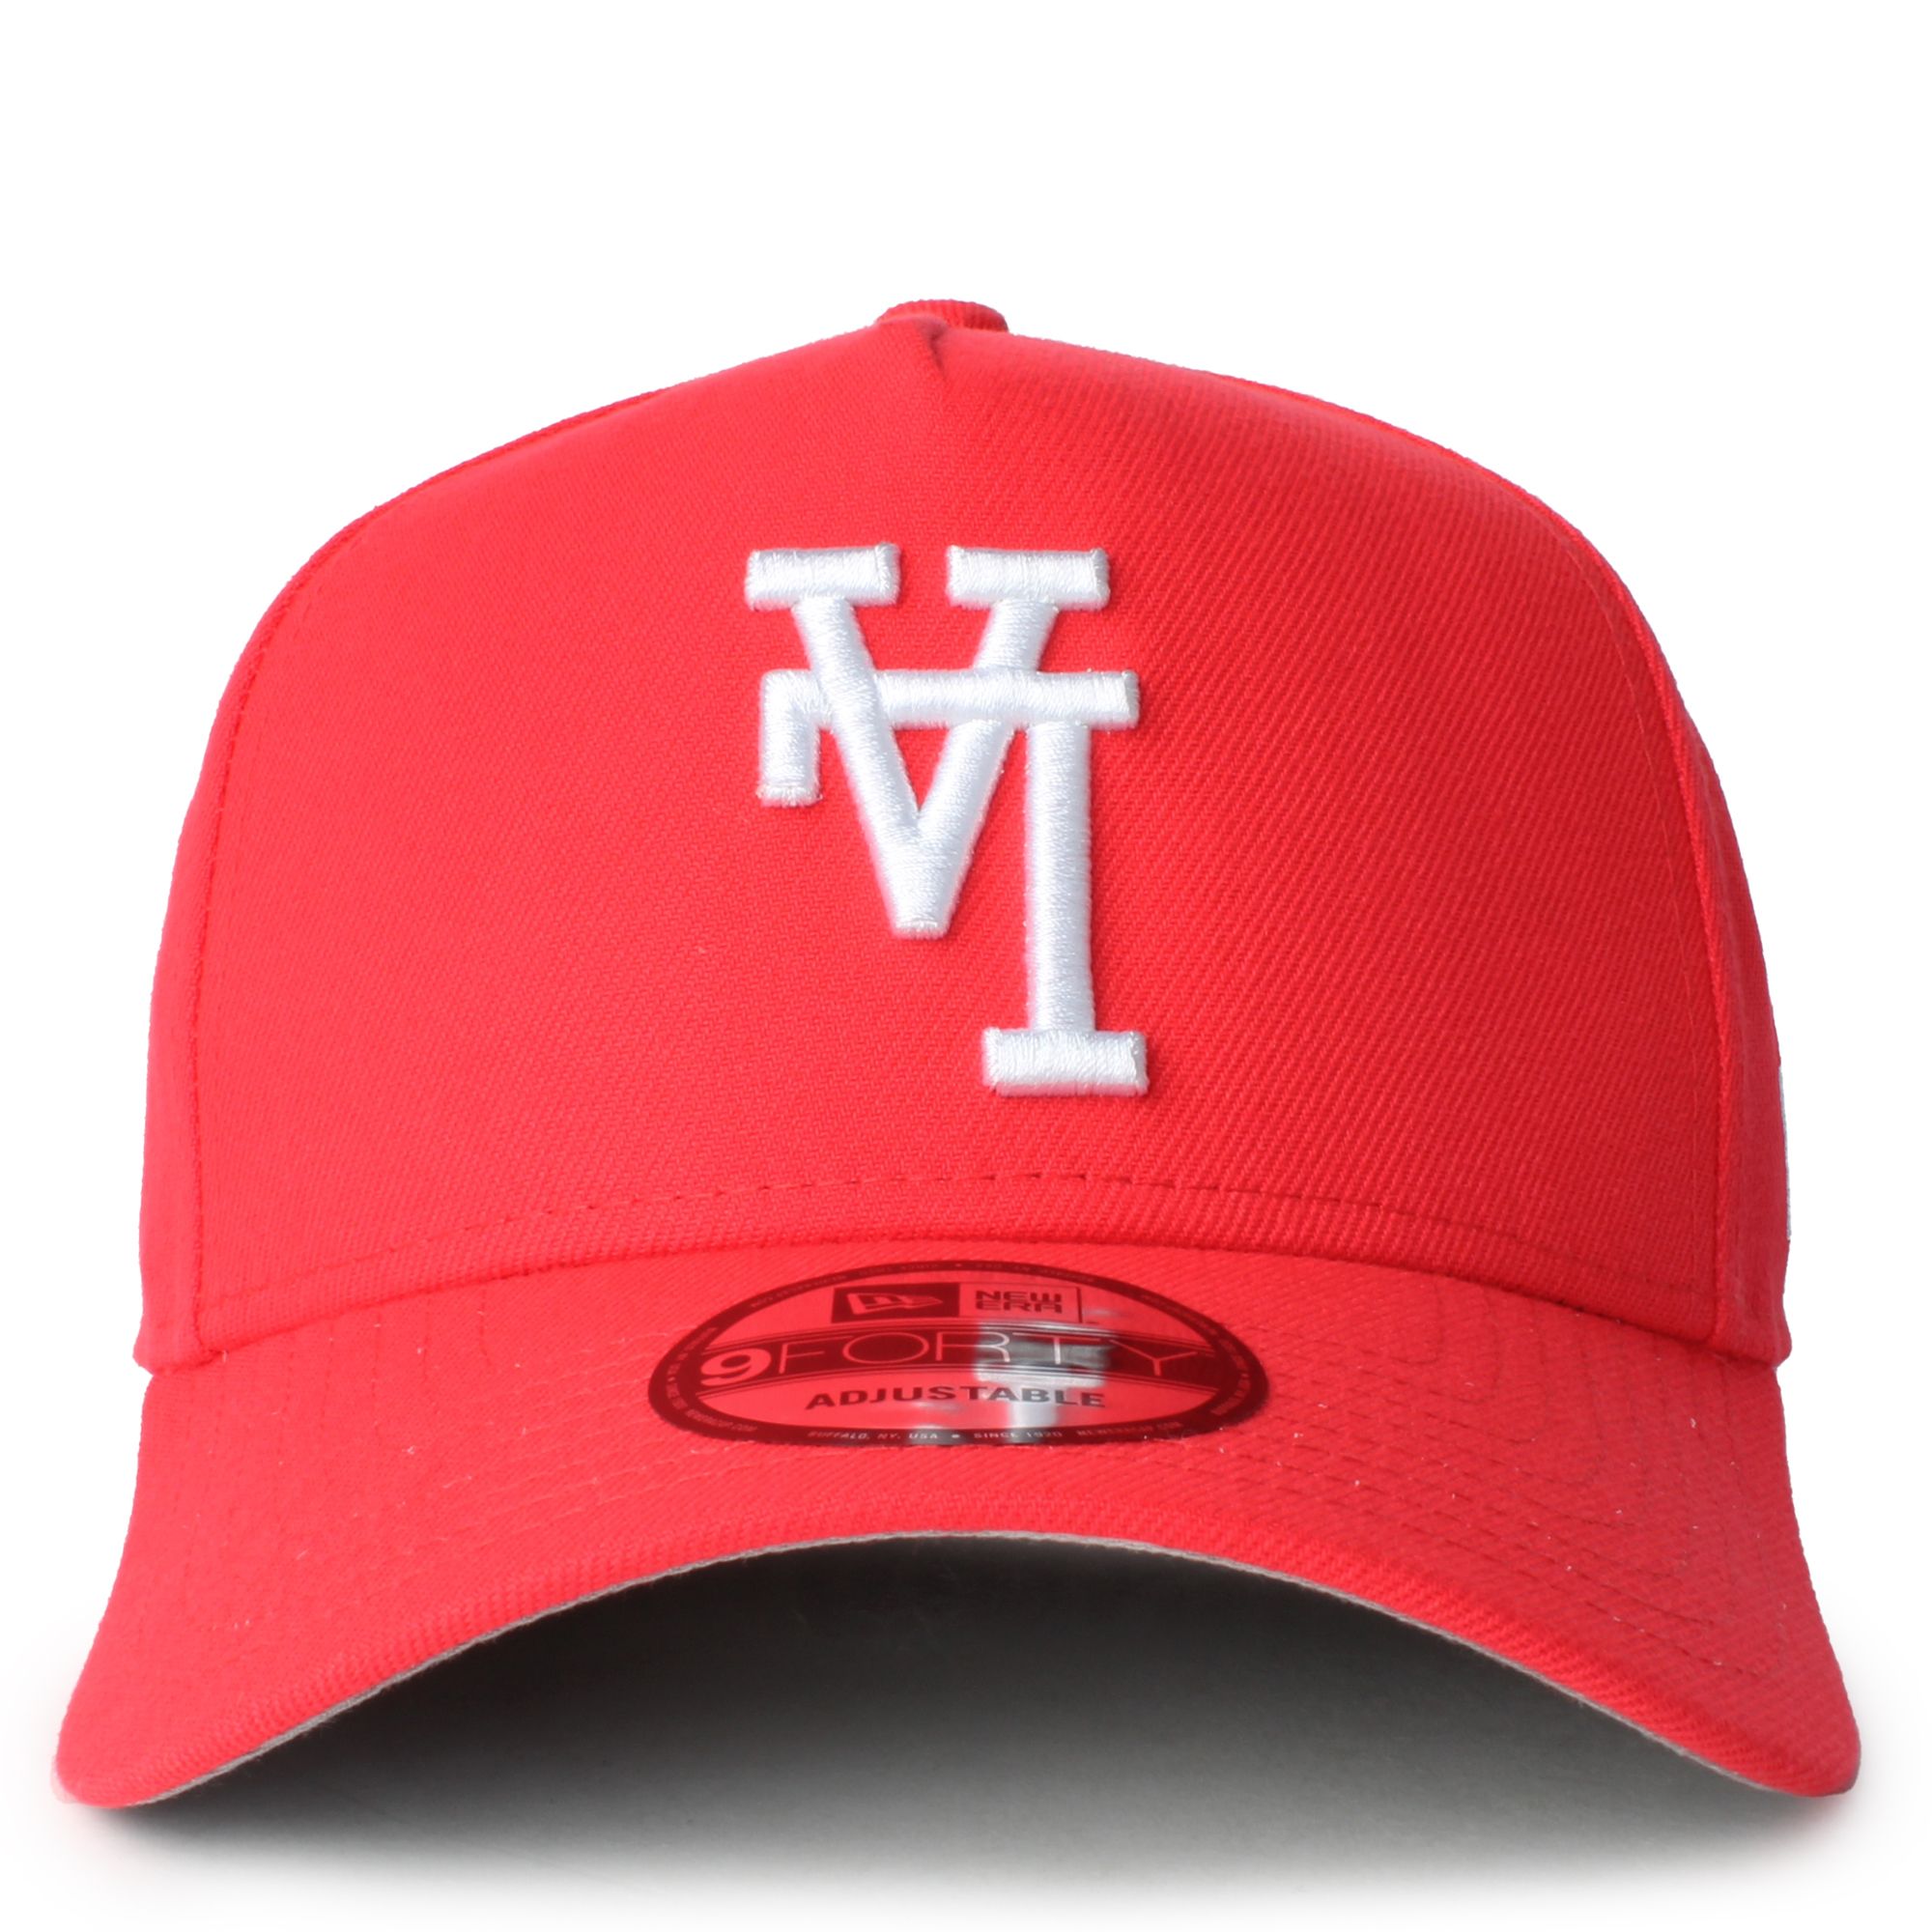 New Era NY 9Forty Red Cap  Cap outfits for women, Baseball cap outfit,  Outfits with hats